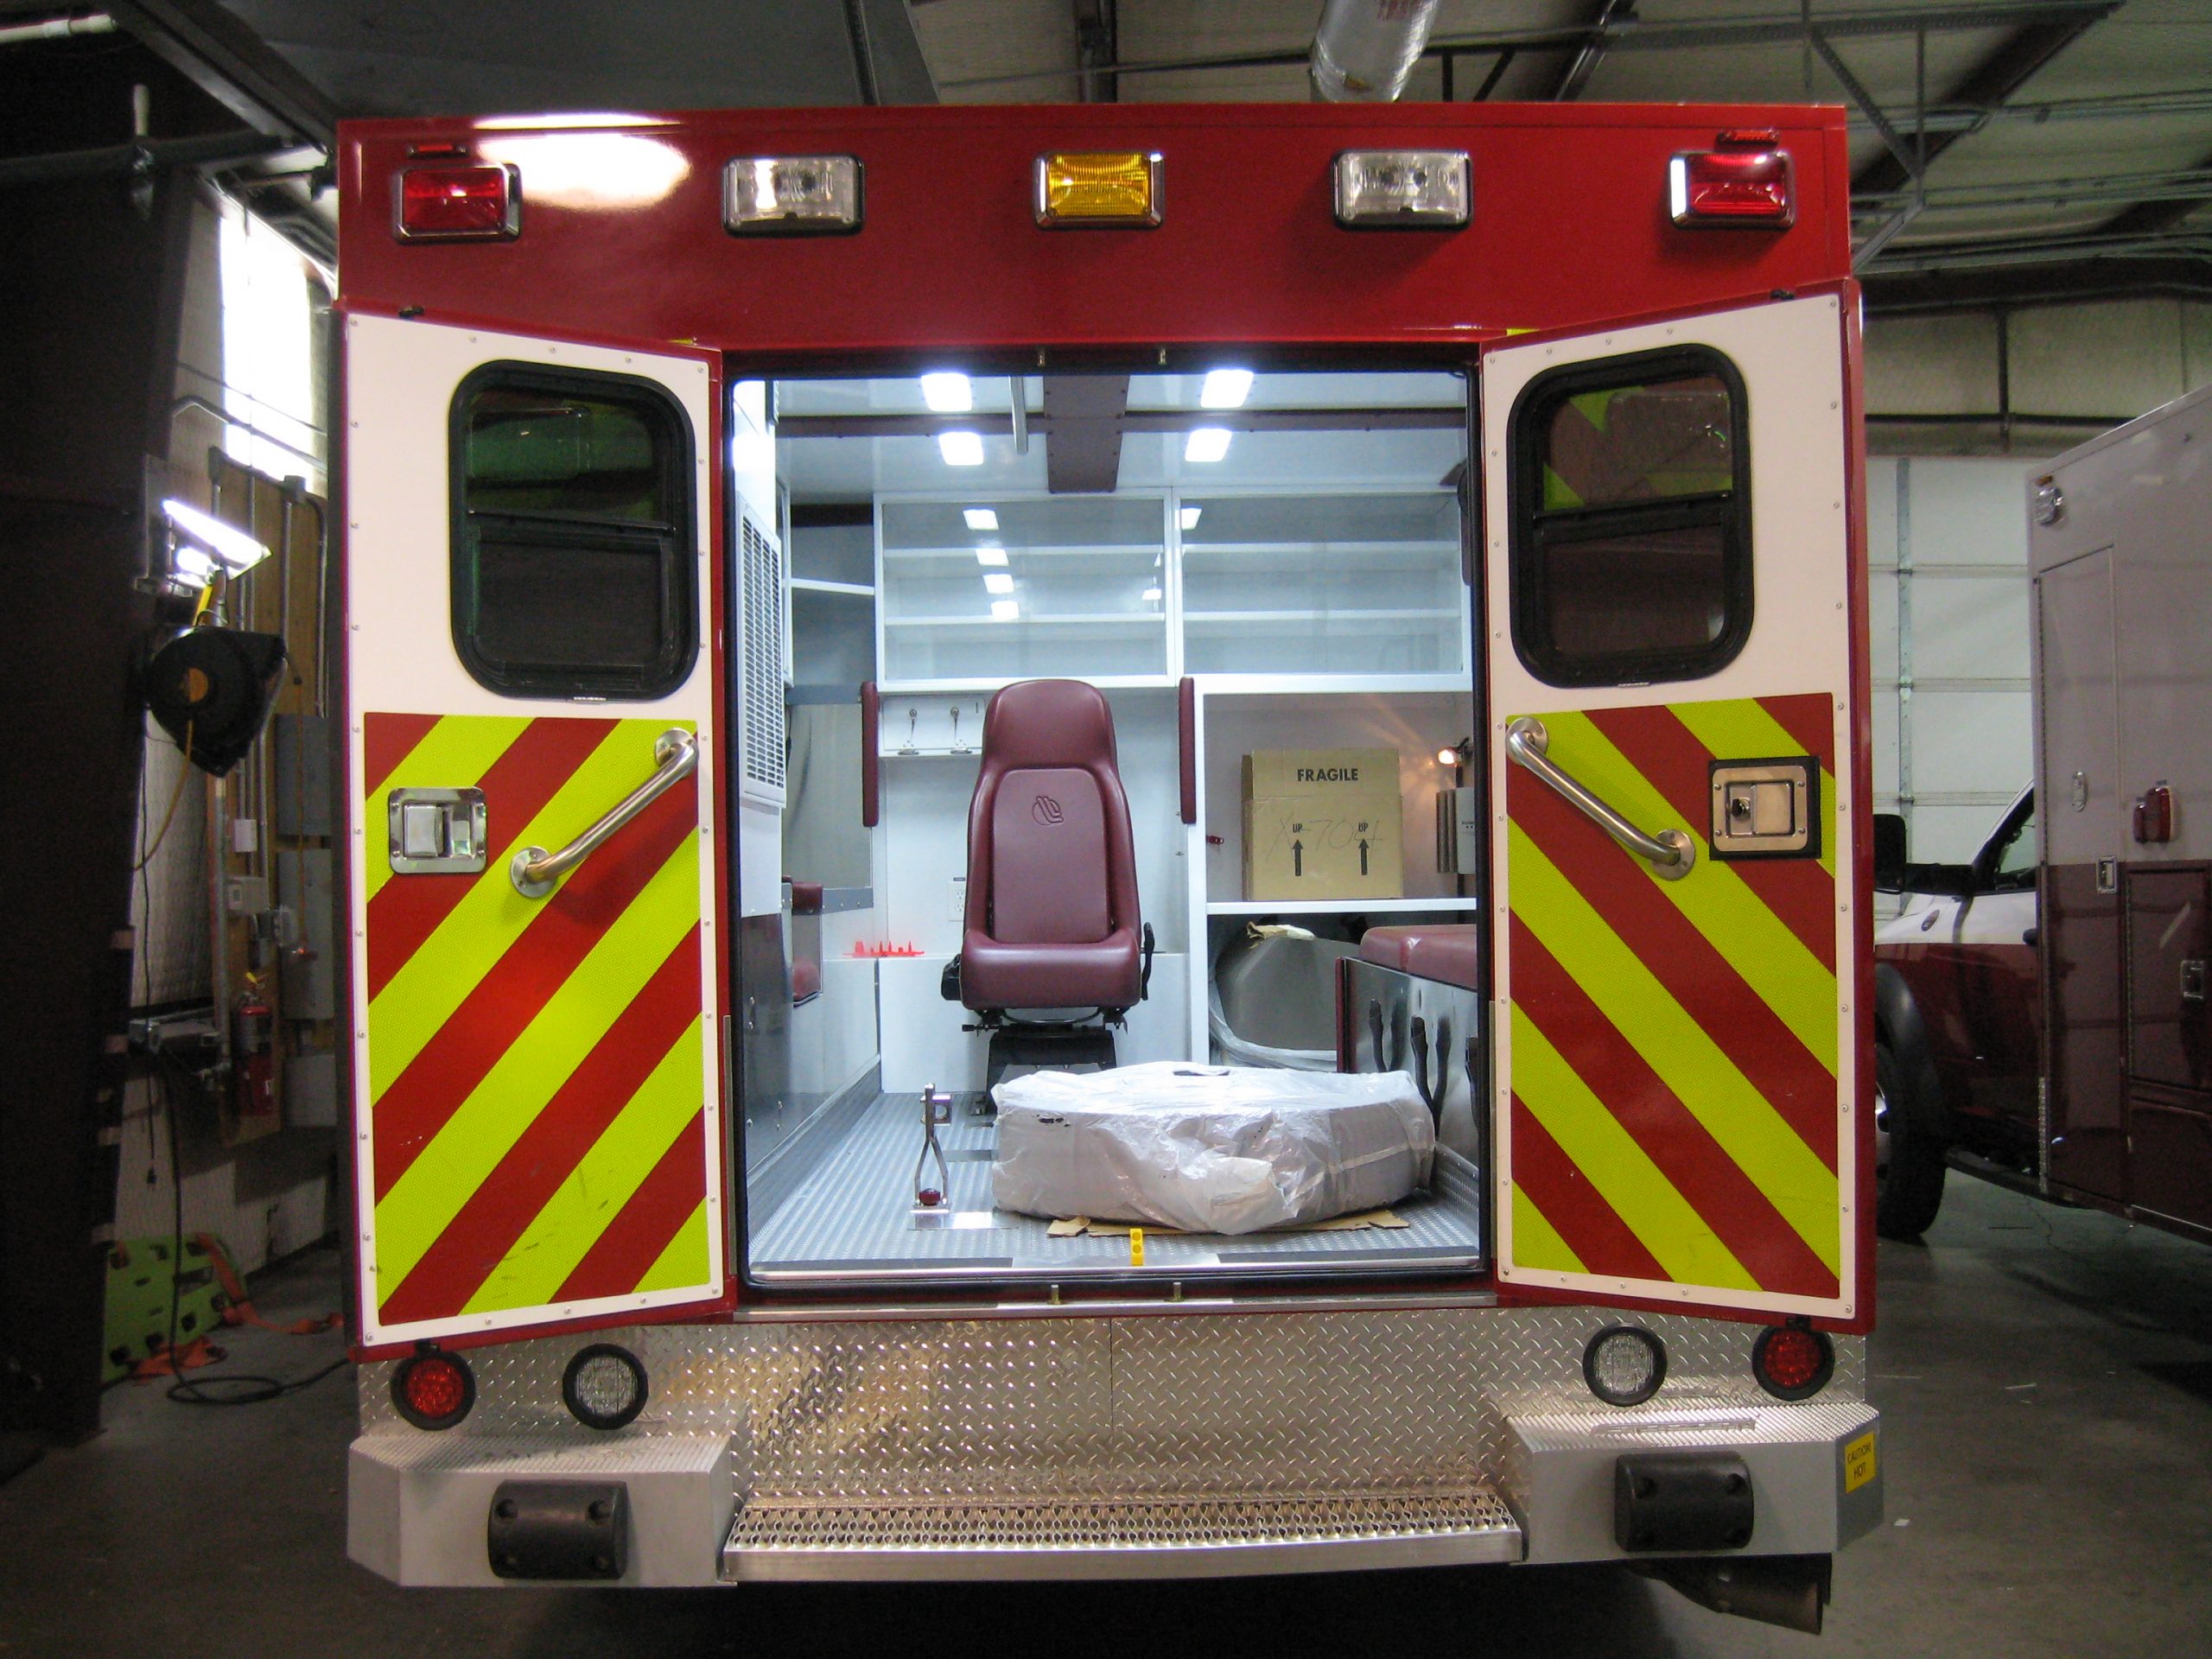 remounted ambulance with the back doors open revealing a new interior